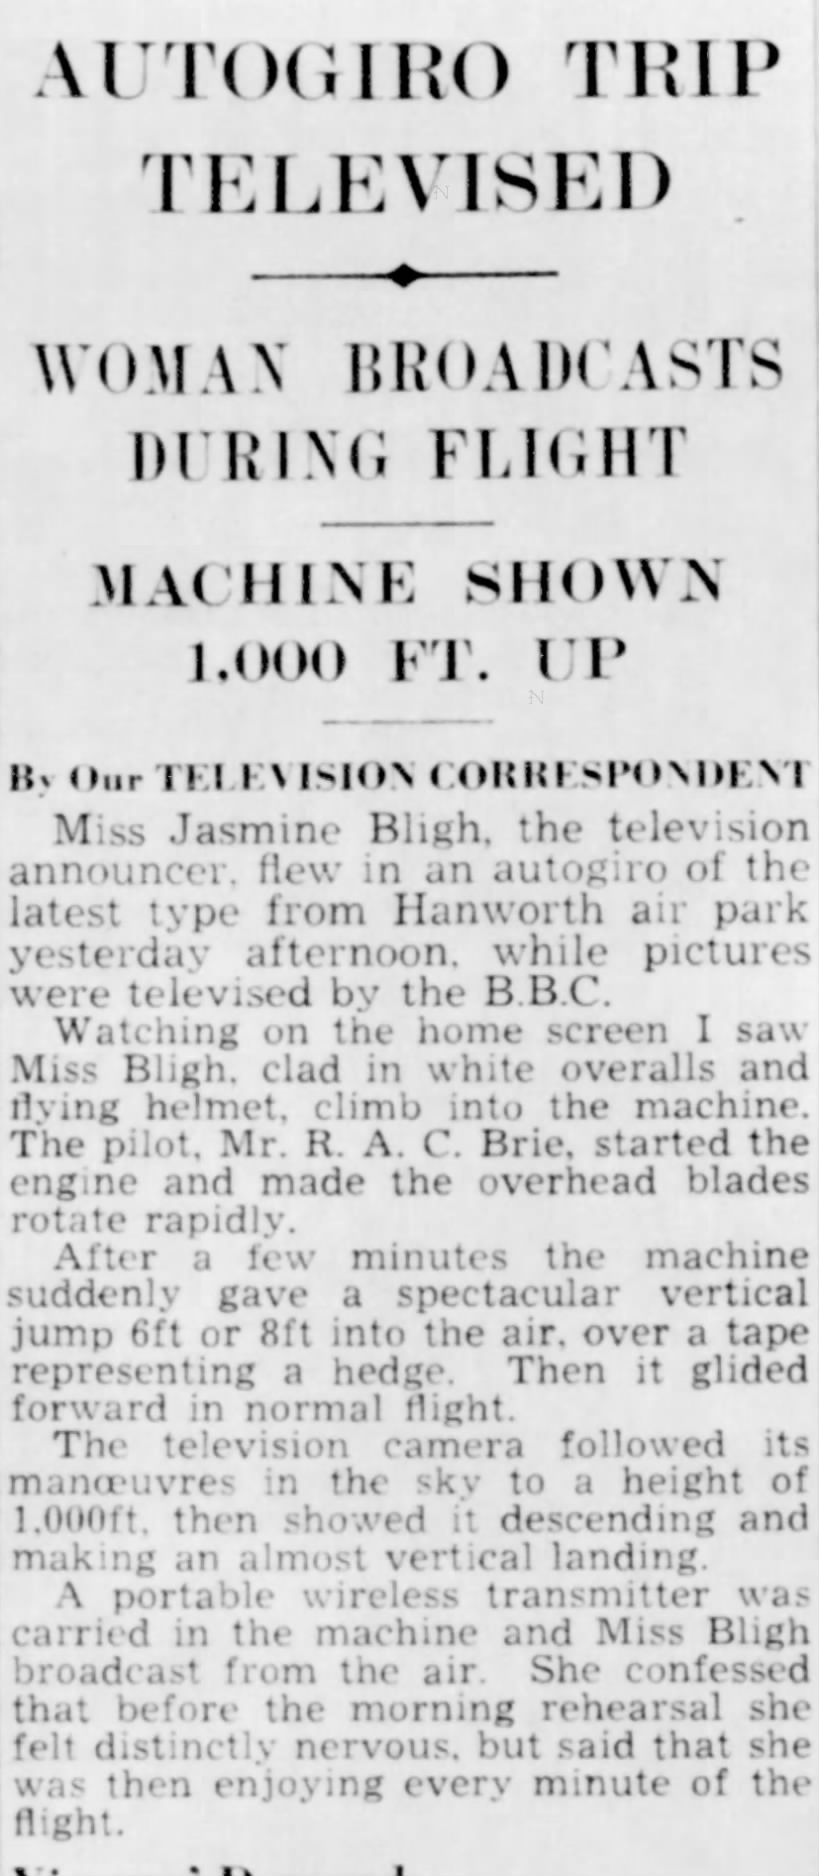 Autogiro trip televised - The Daily Telegraph - 20 February 1939 - Page 8